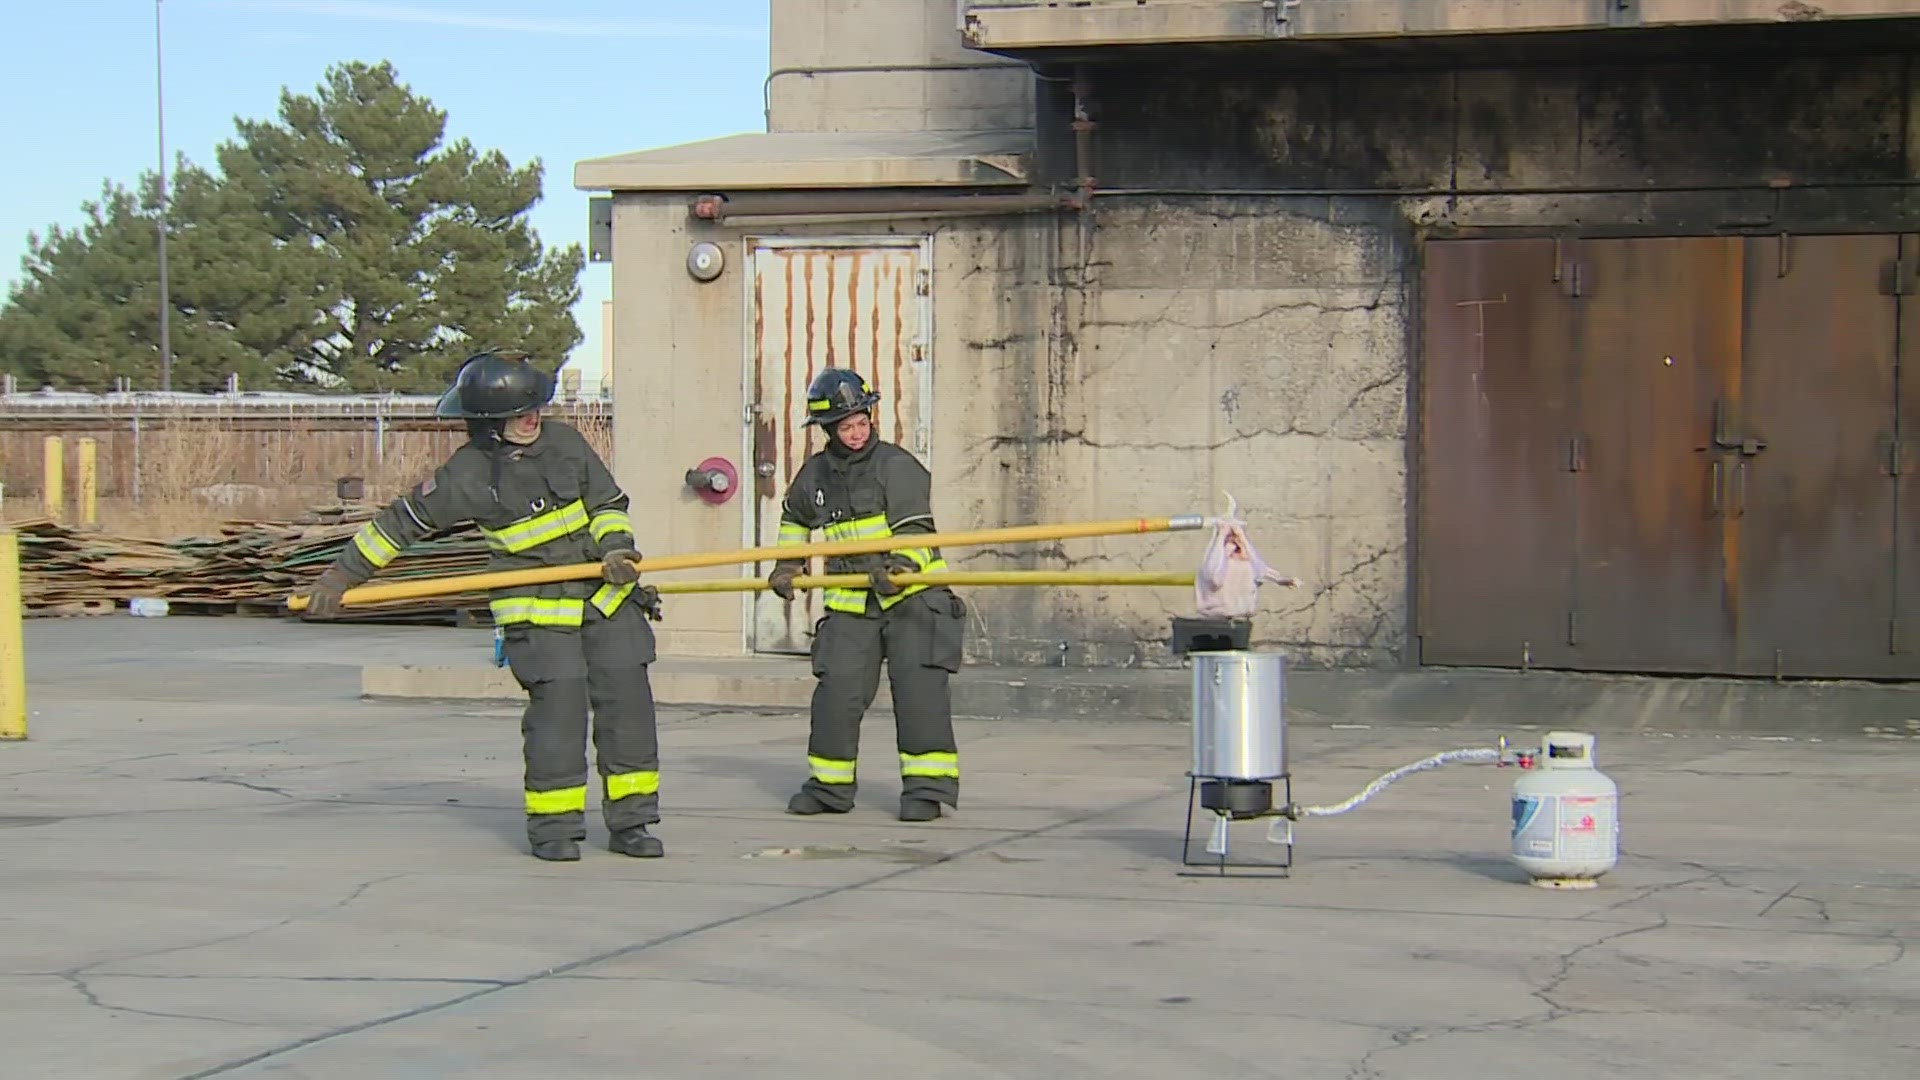 The Denver Fire Department says frying turkey the wrong way can cause a big fire.